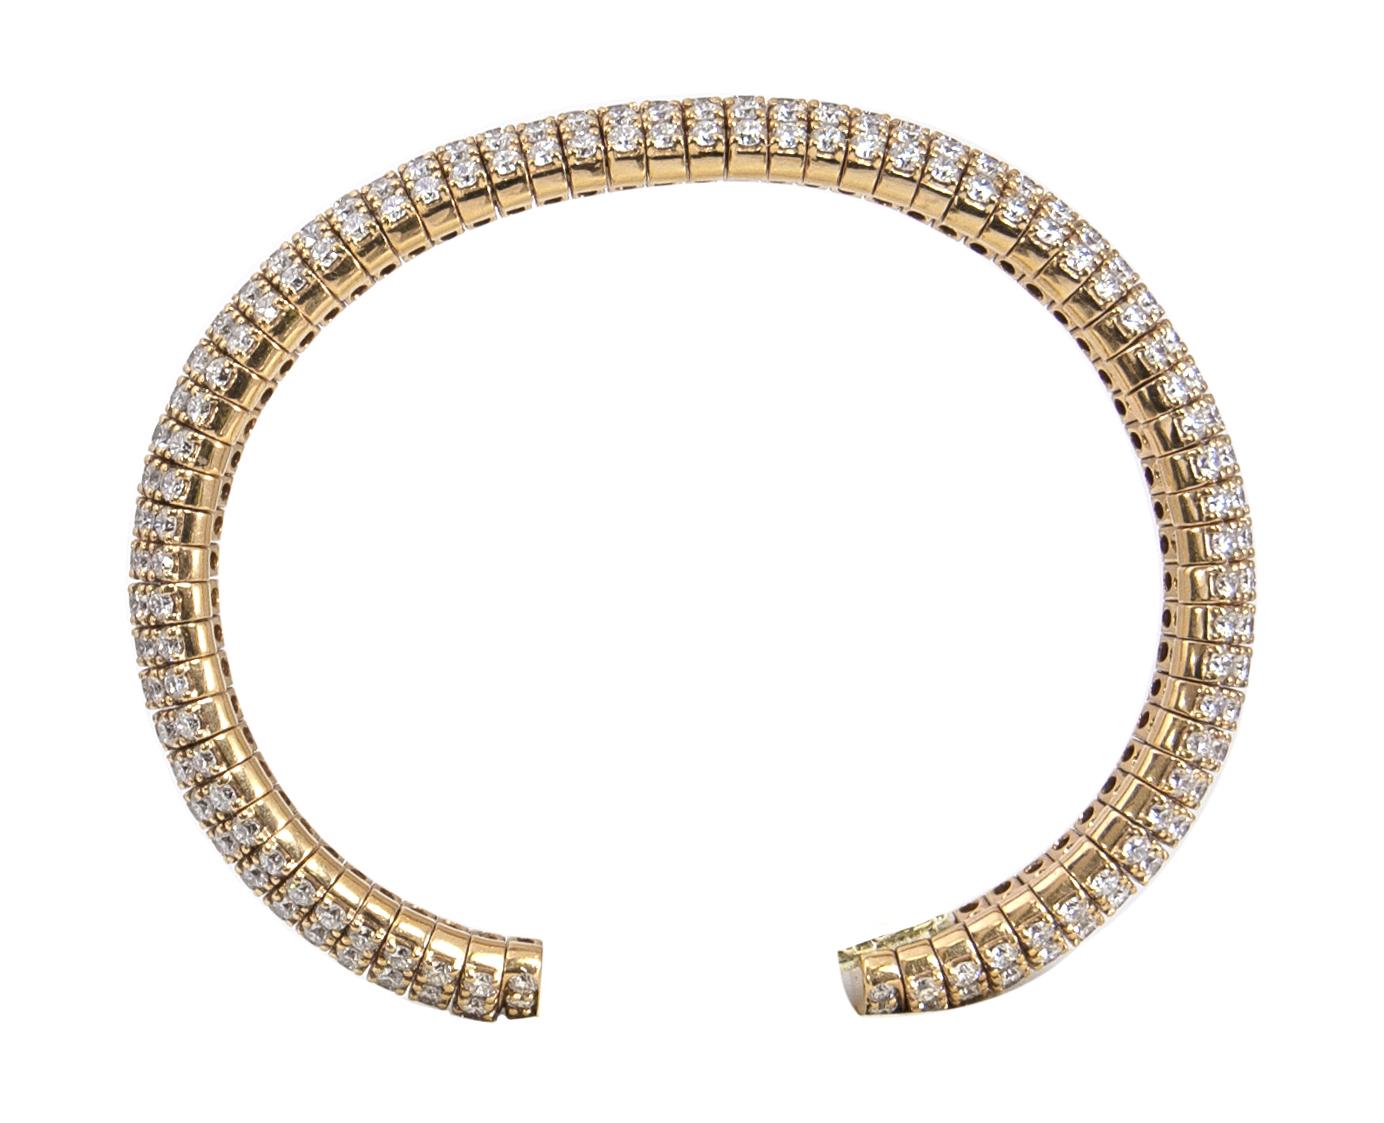 Beautiful open and flexible bangle with 12.40 carats of dazzling diamonds pave set in 18 karat yellow gold.